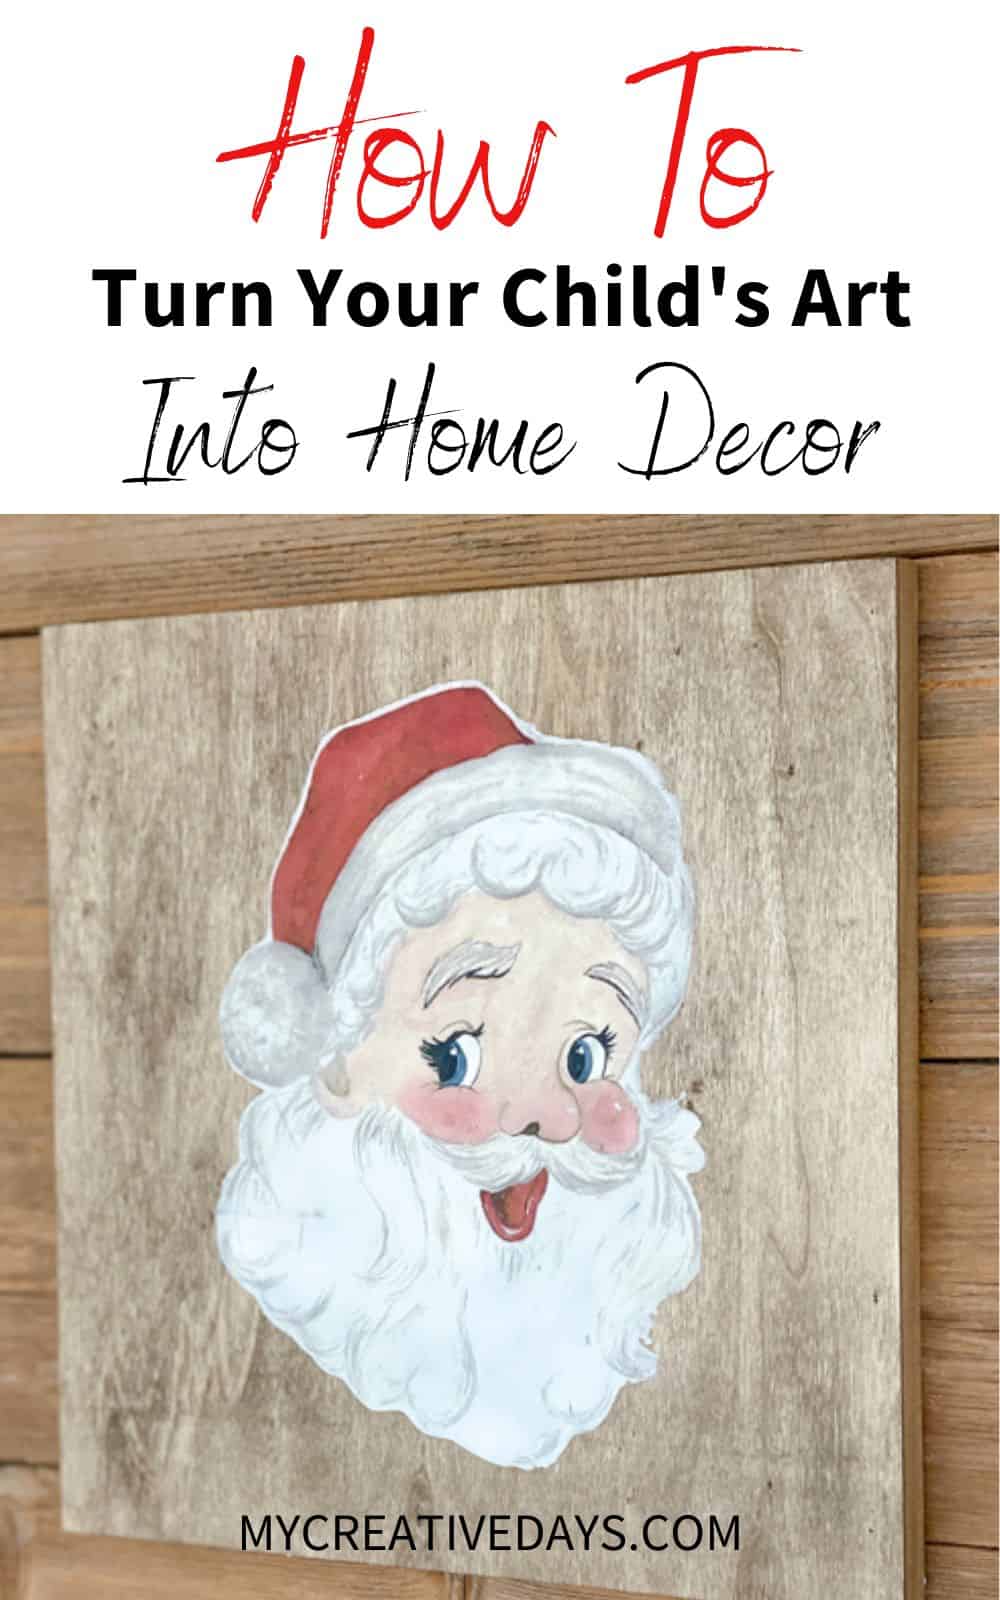 Your child has art that you want to preserve. This post will show you how to turn your child's art into home decor that you will love.